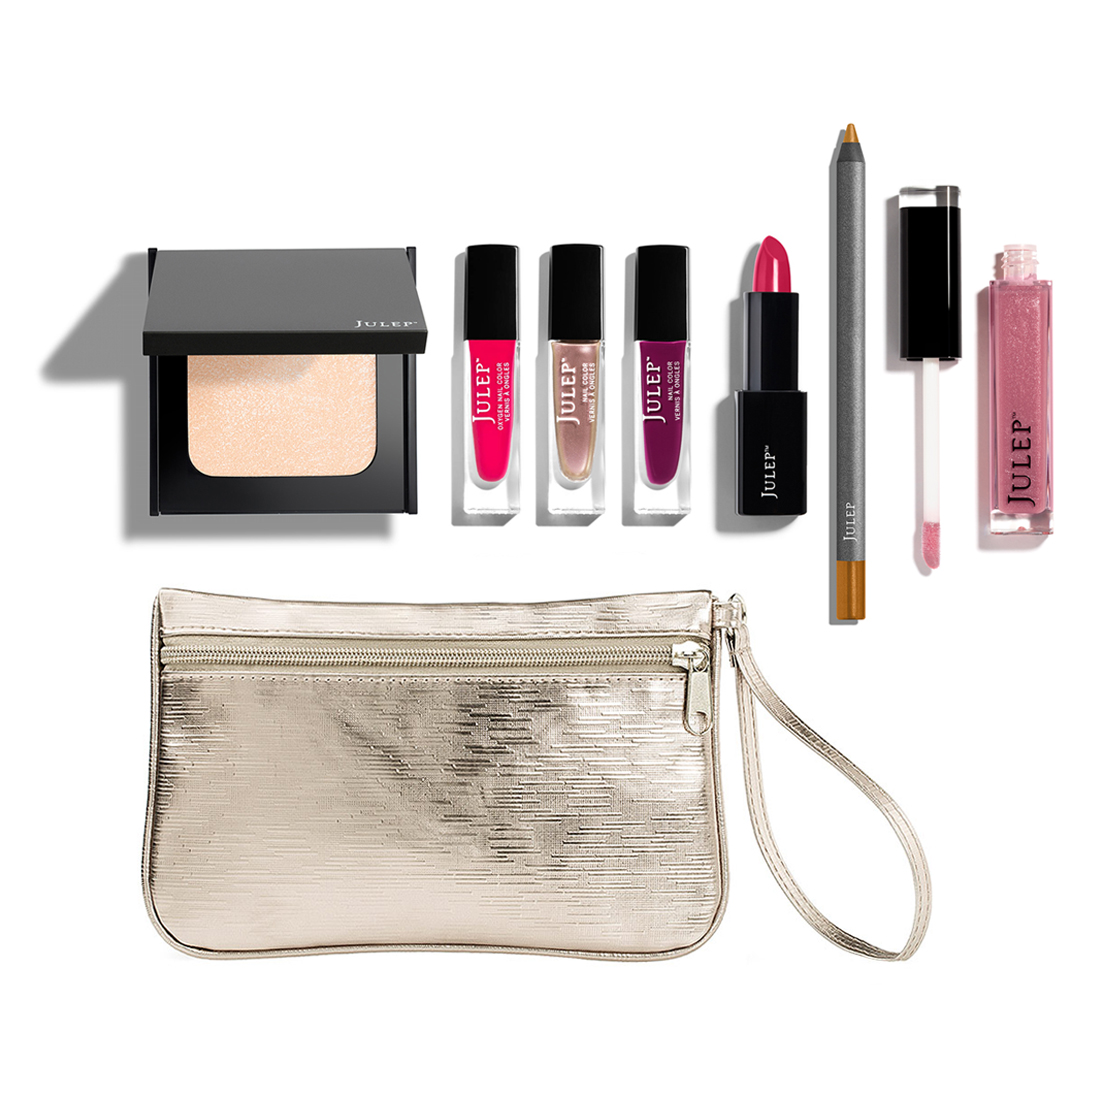 FREE 8-pc Julep Beauty Set From Julep!! Valued at $150!!